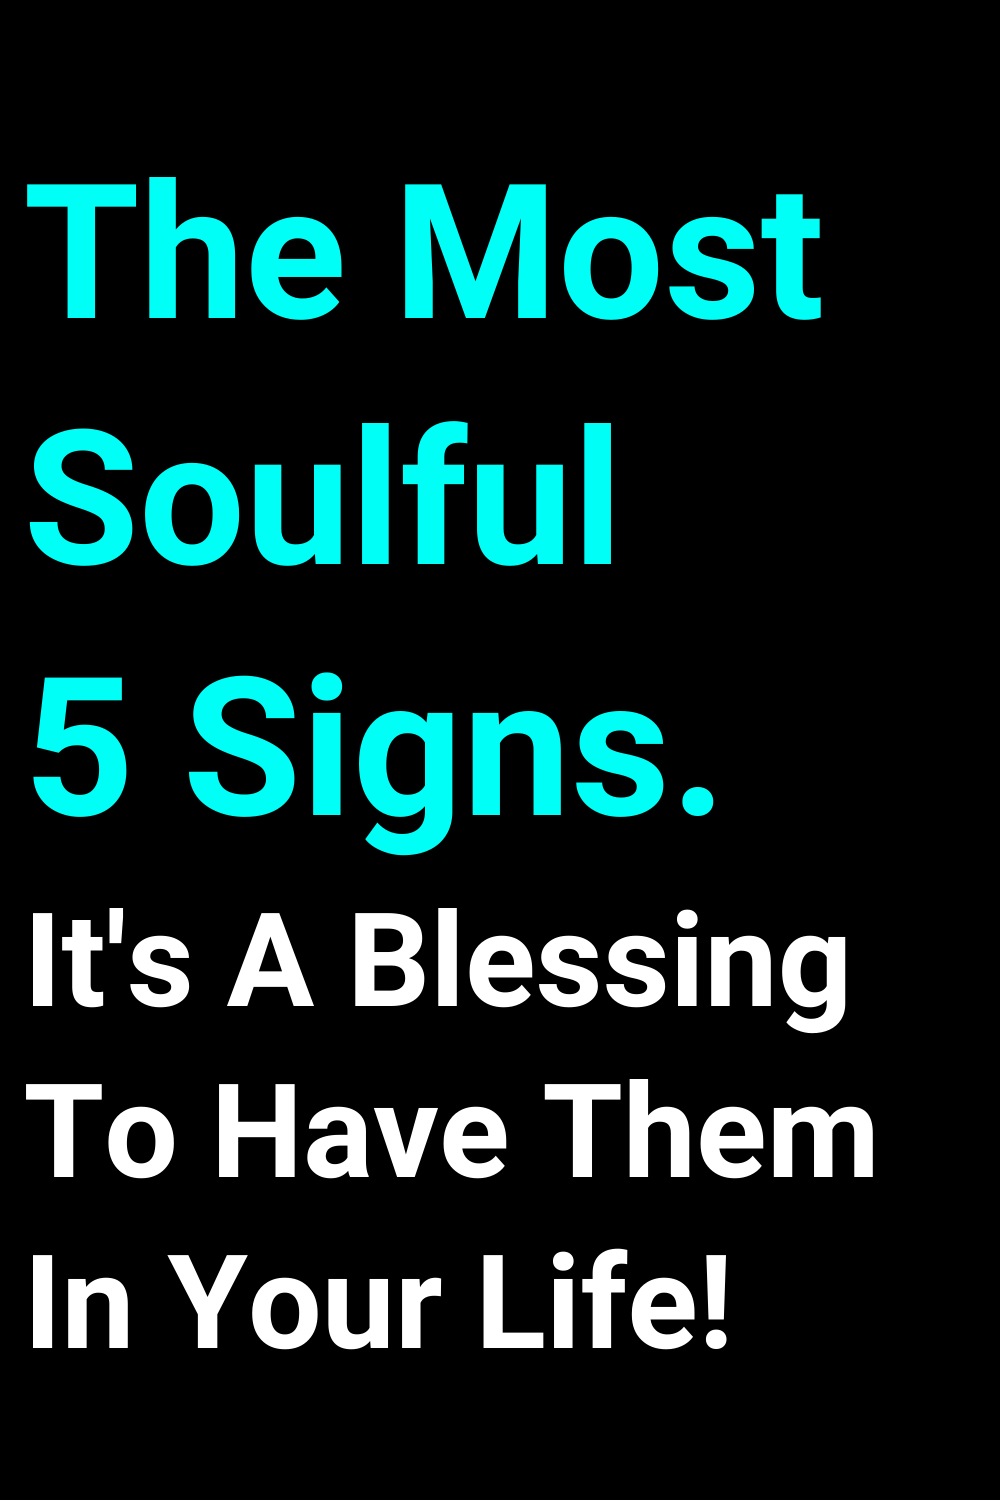 The Most Soulful 5 Signs. It's A Blessing To Have Them In Your Life!